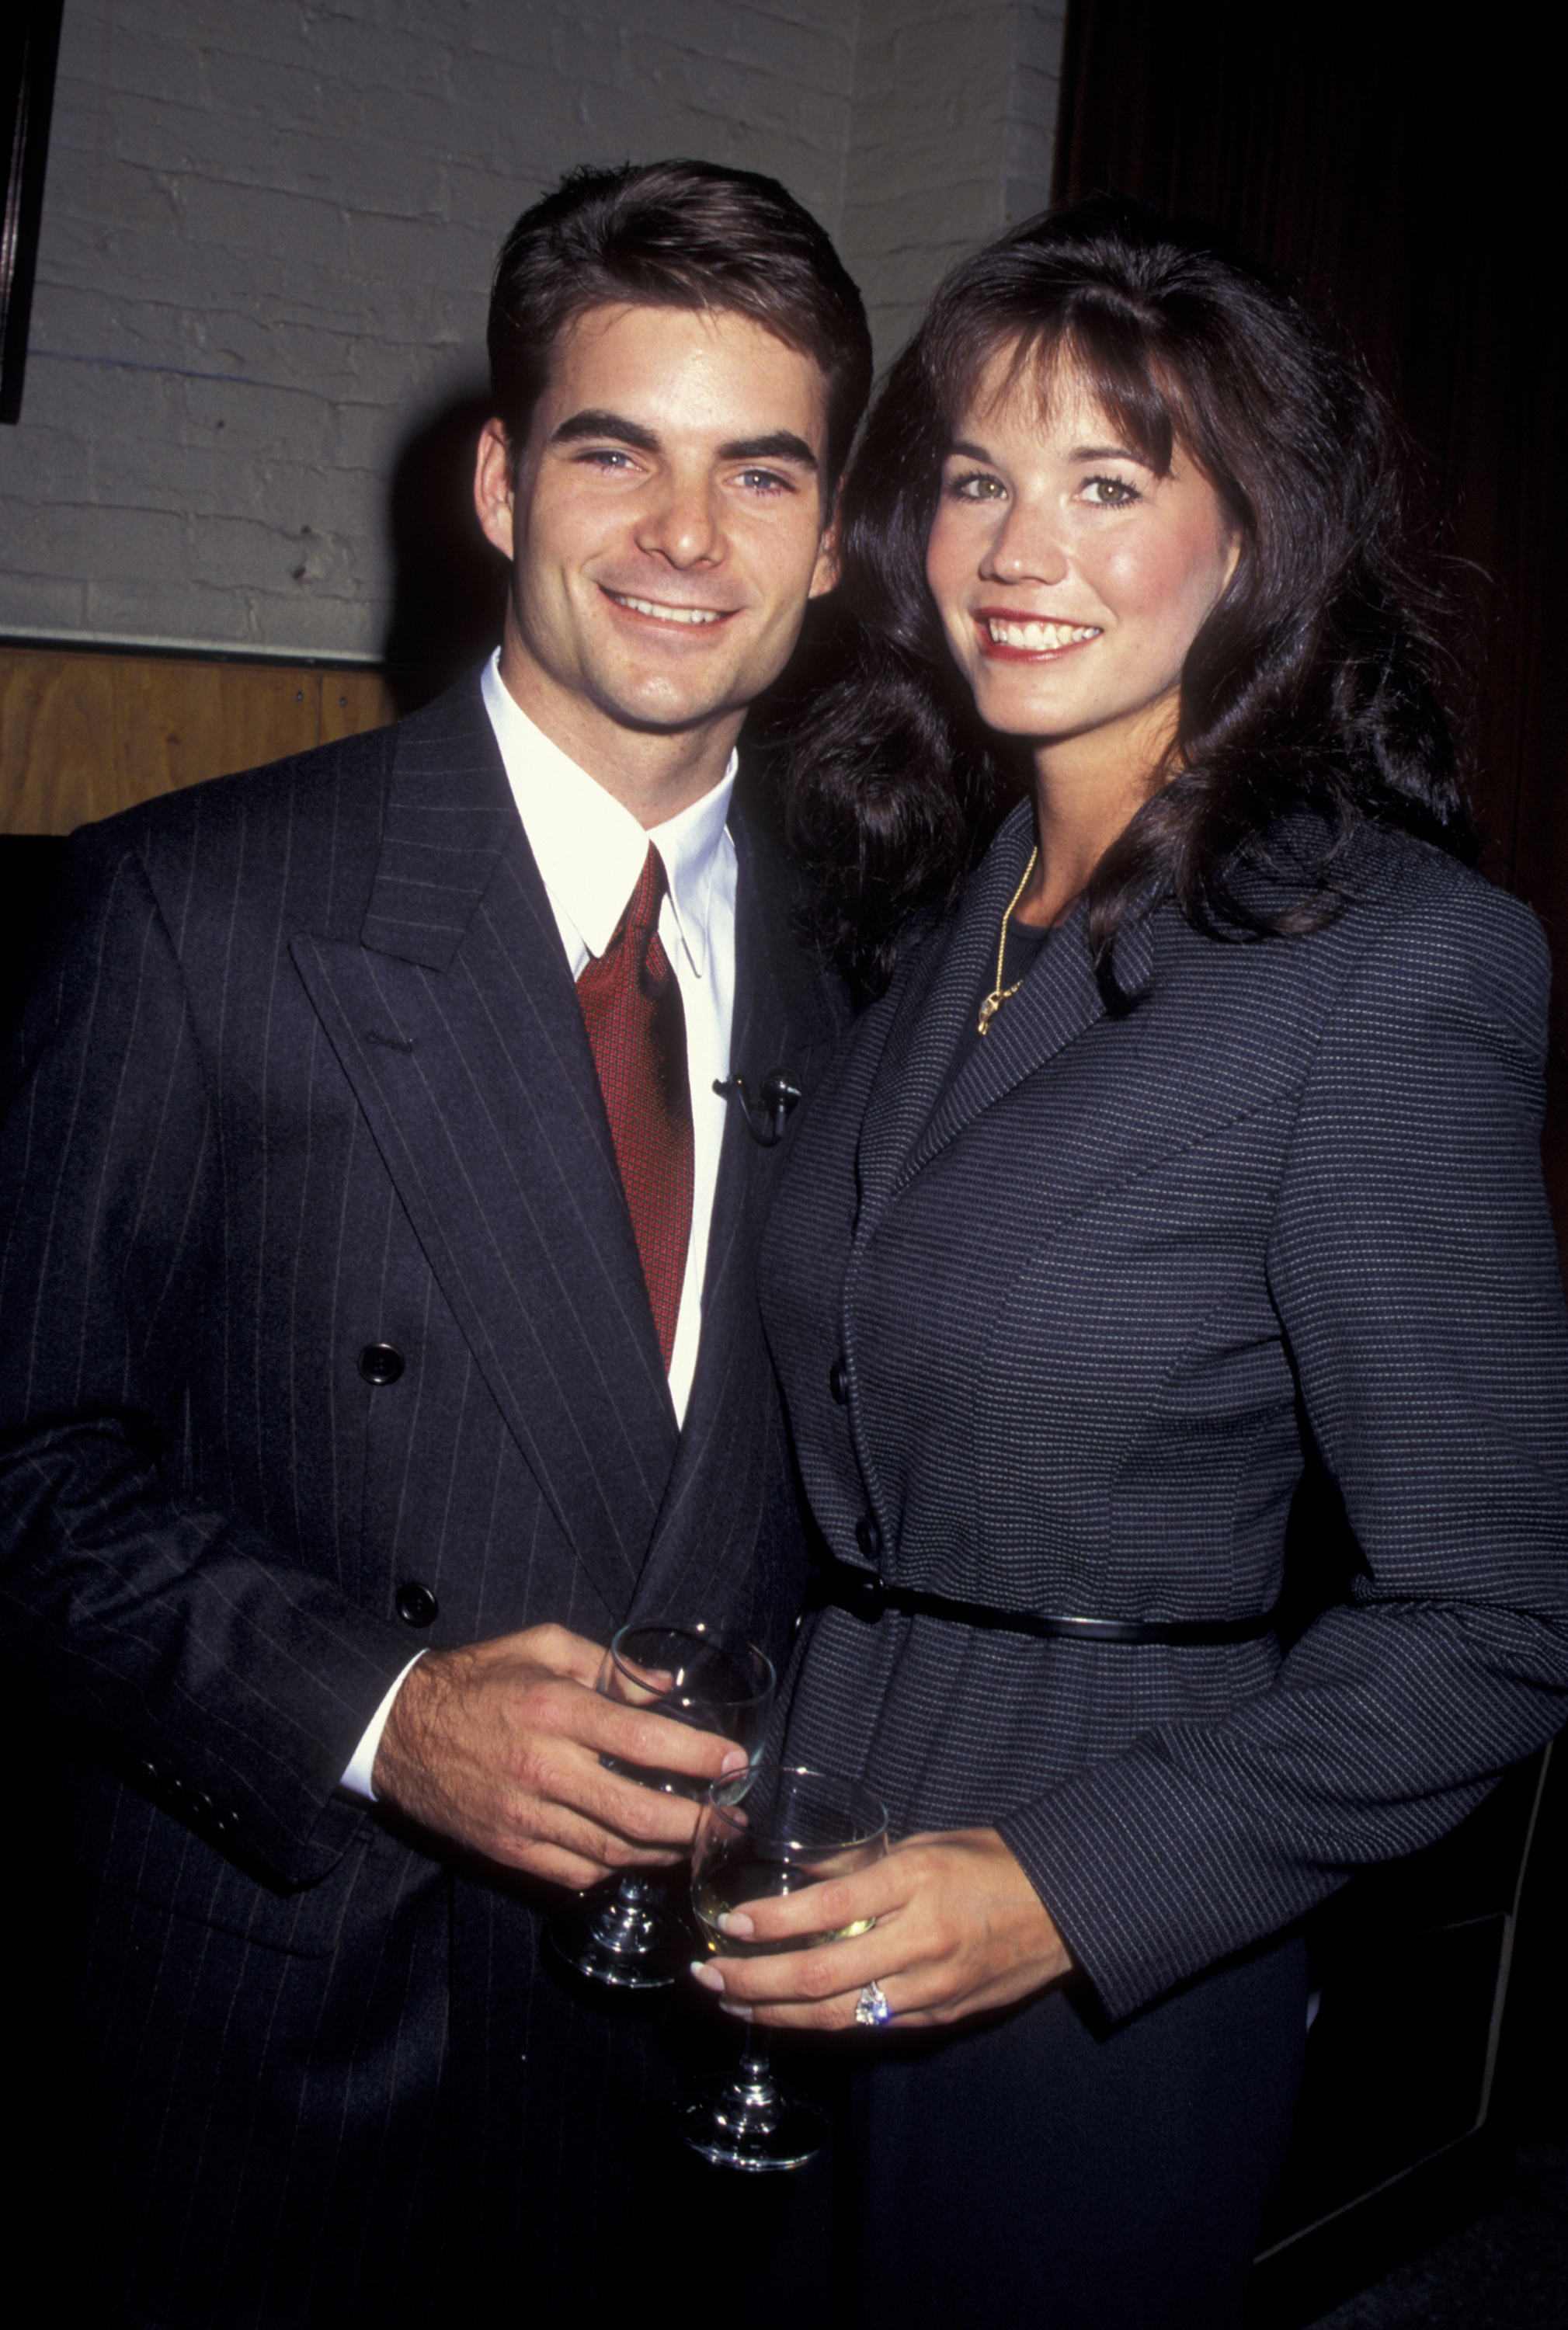 Jeff Gordon and Brooke Sealey at the NASCAR Winston Cup Celebration Gala on November 27, 1995, in New York City. | Source: Getty Images